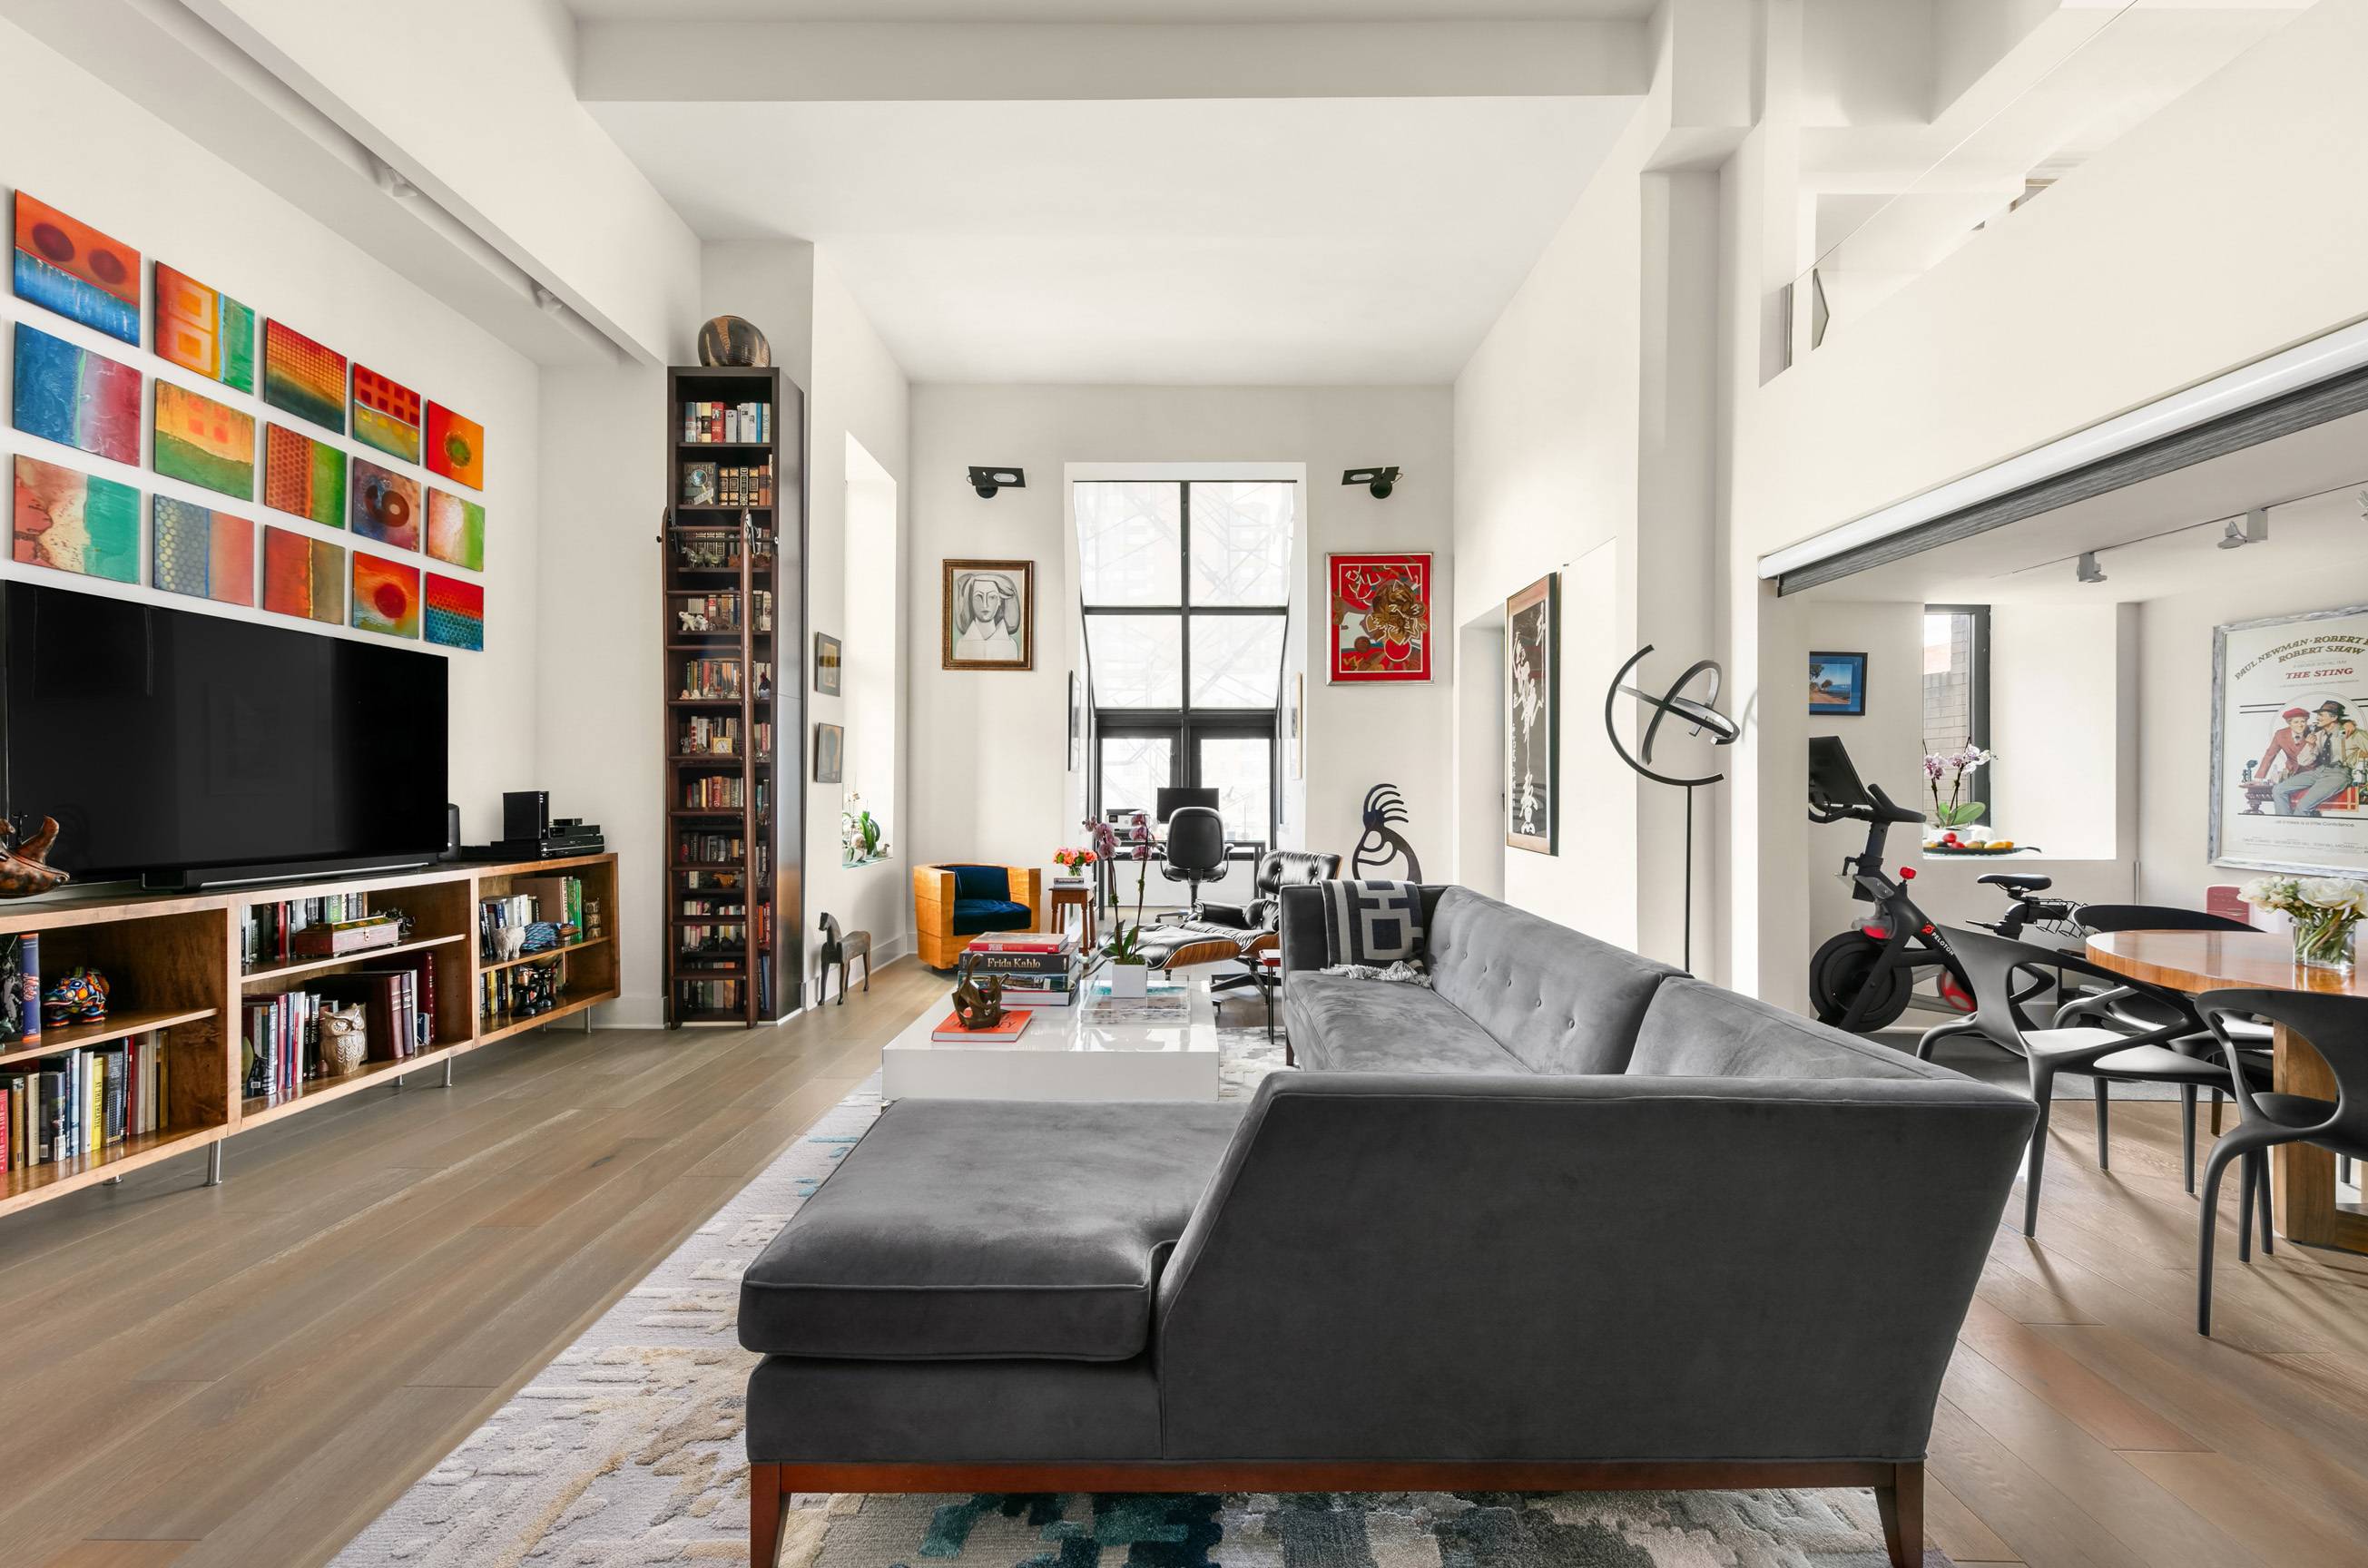 A genuine rarity these days, this incredible two bedroom, two bathroom loft duplex embodies classic New York City living in a historic artist loft setting.